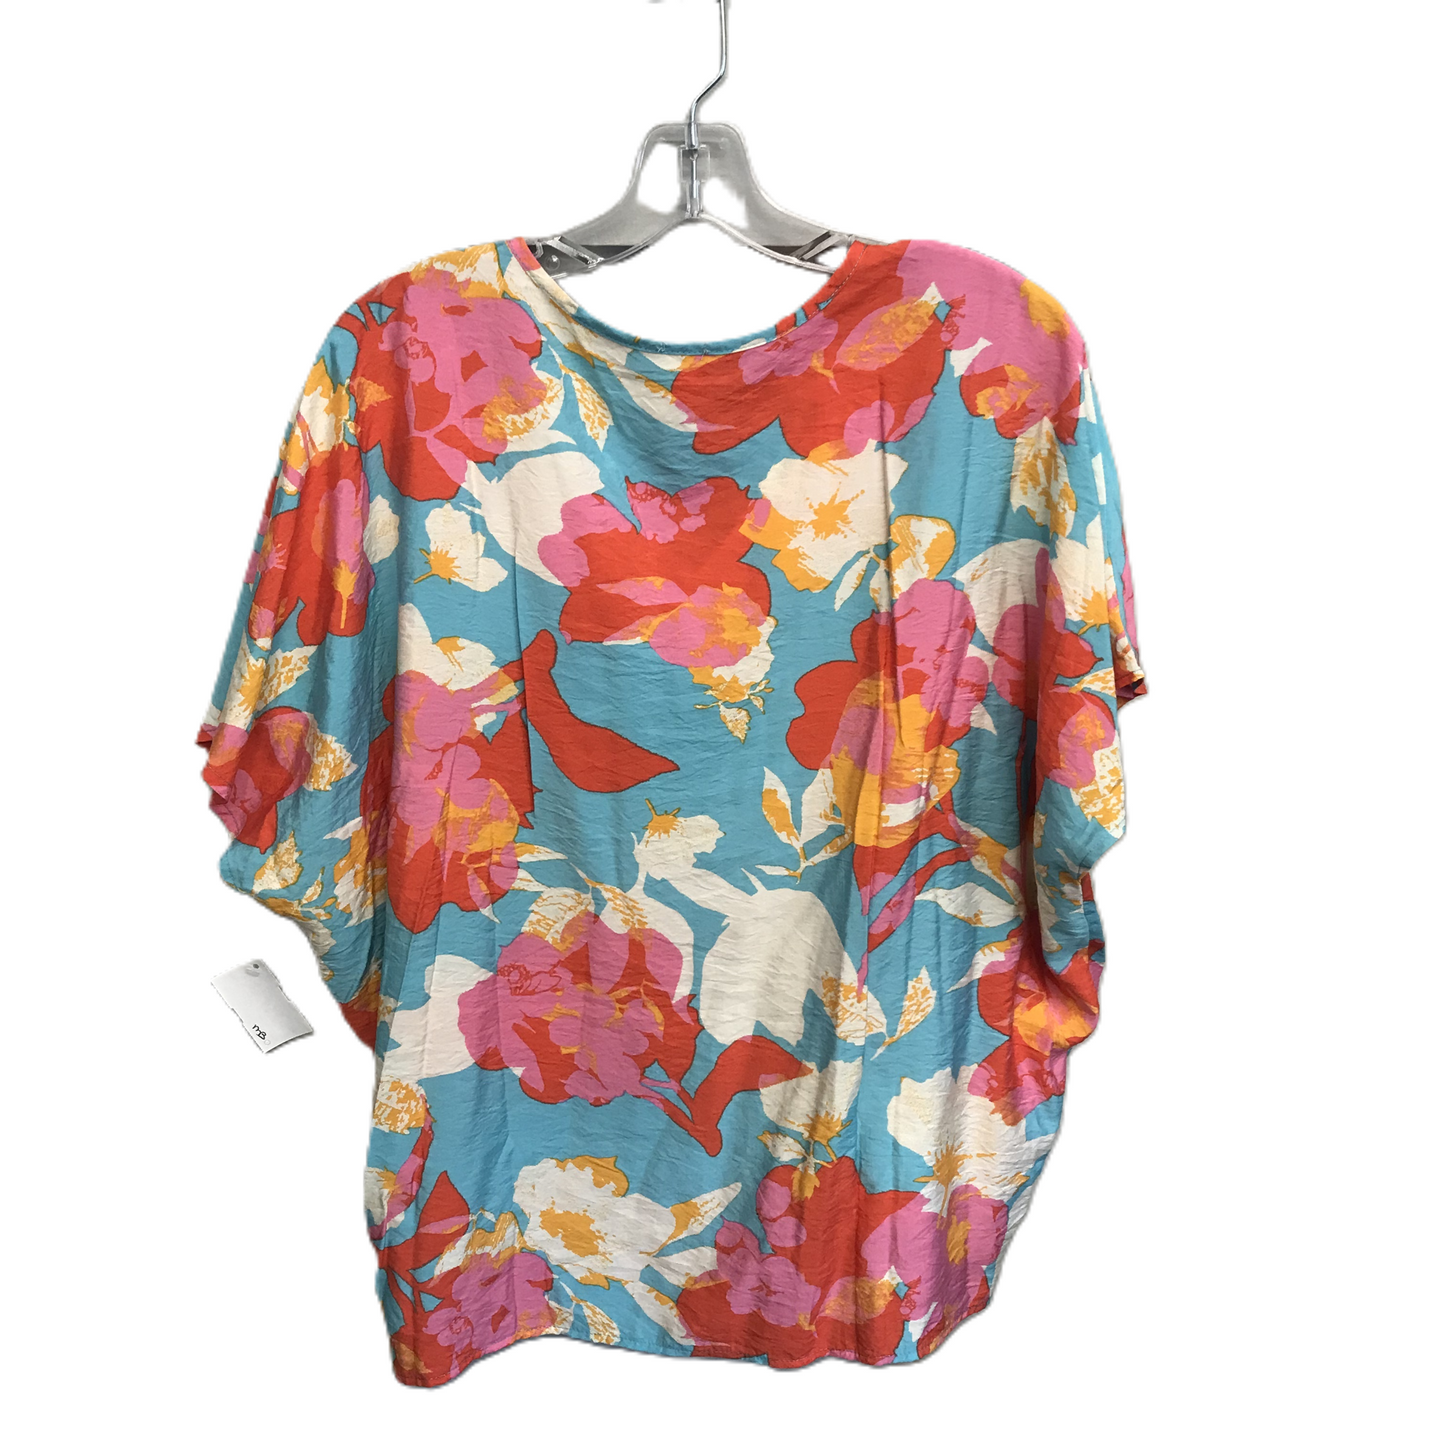 Floral Print Top Sleeveless By Like Love, Size: S